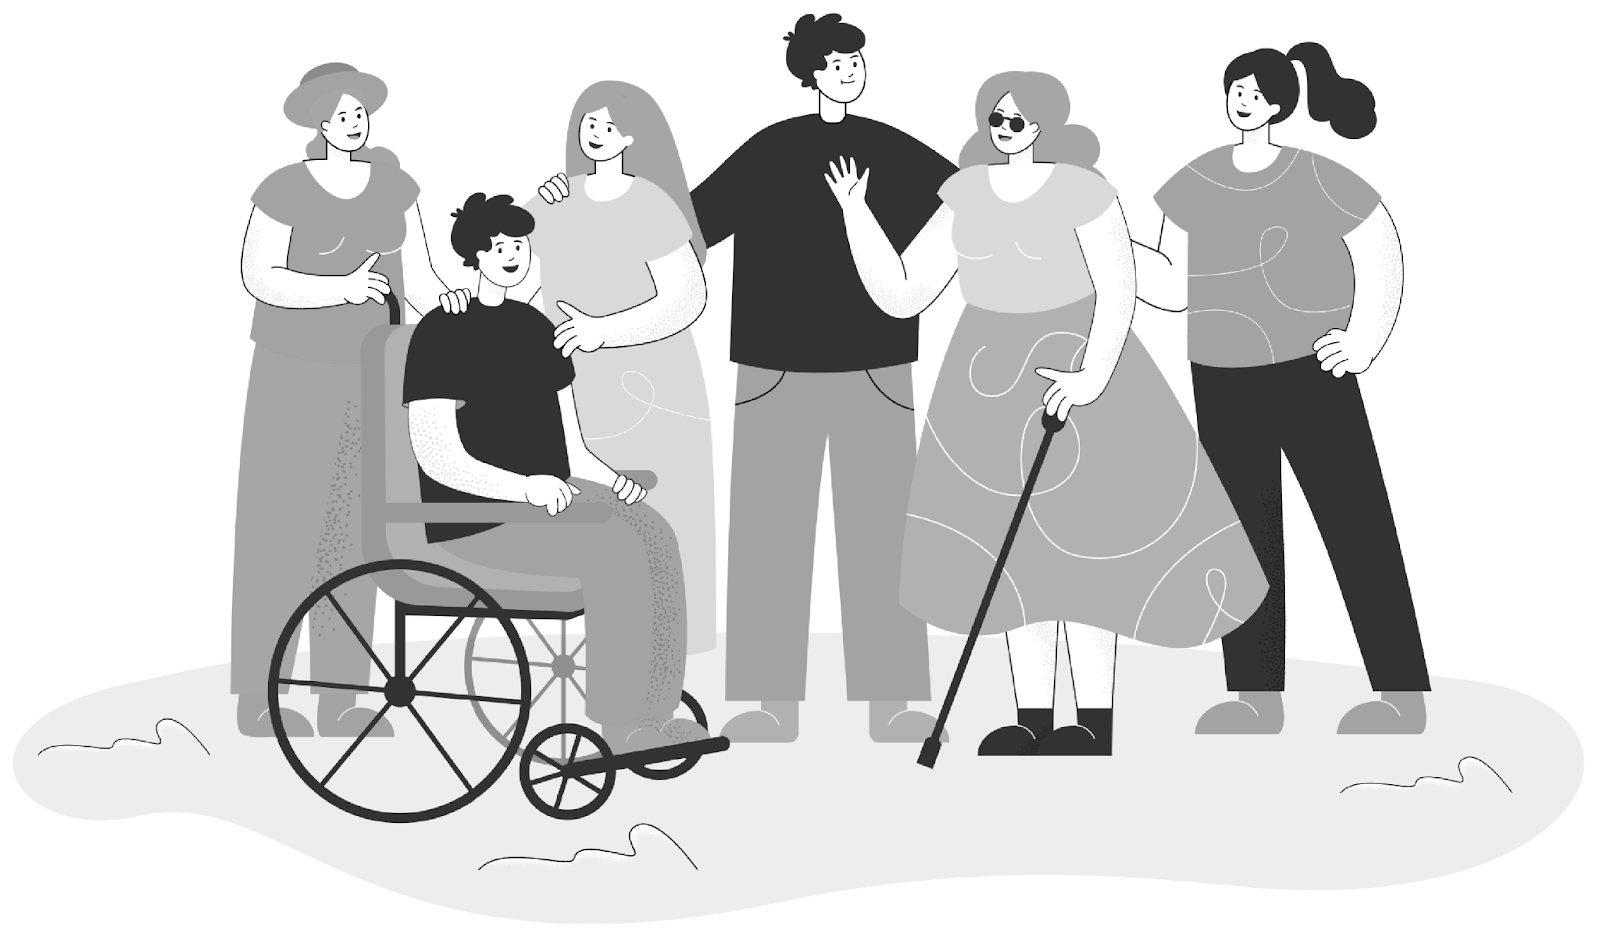 Image by pch.vector on Freepik https://www.freepik.com/free-vector/men-women-welcoming-people-with-disabilities-group-people-meeting-blind-female-character-male-wheelchair_16375447.htm